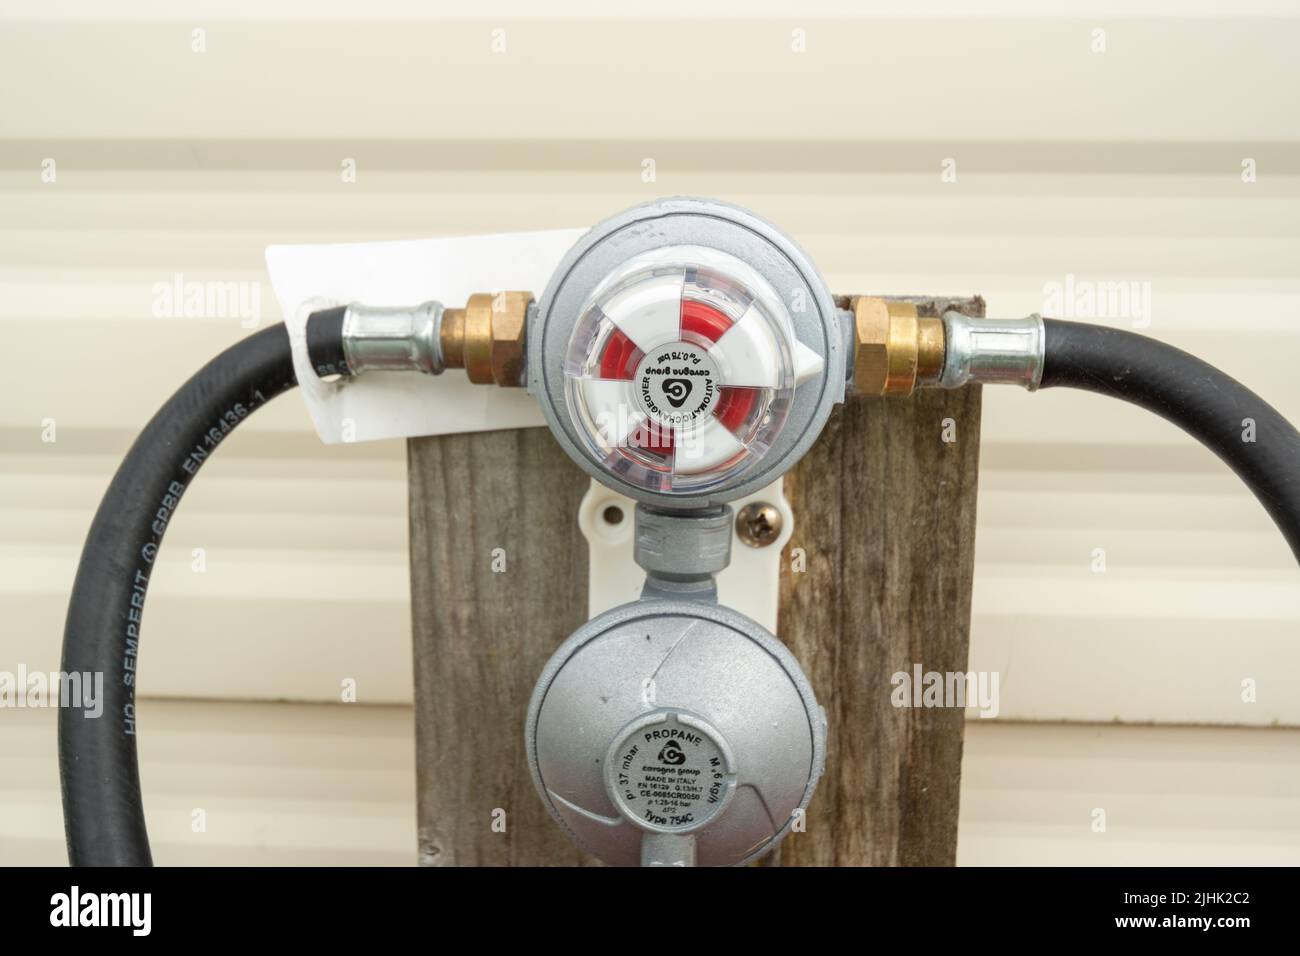 Automatic Changeover valve for propane LPG supplies, allows switching the gas supply from one gas bottle to another without interrupting the supply Stock Photo